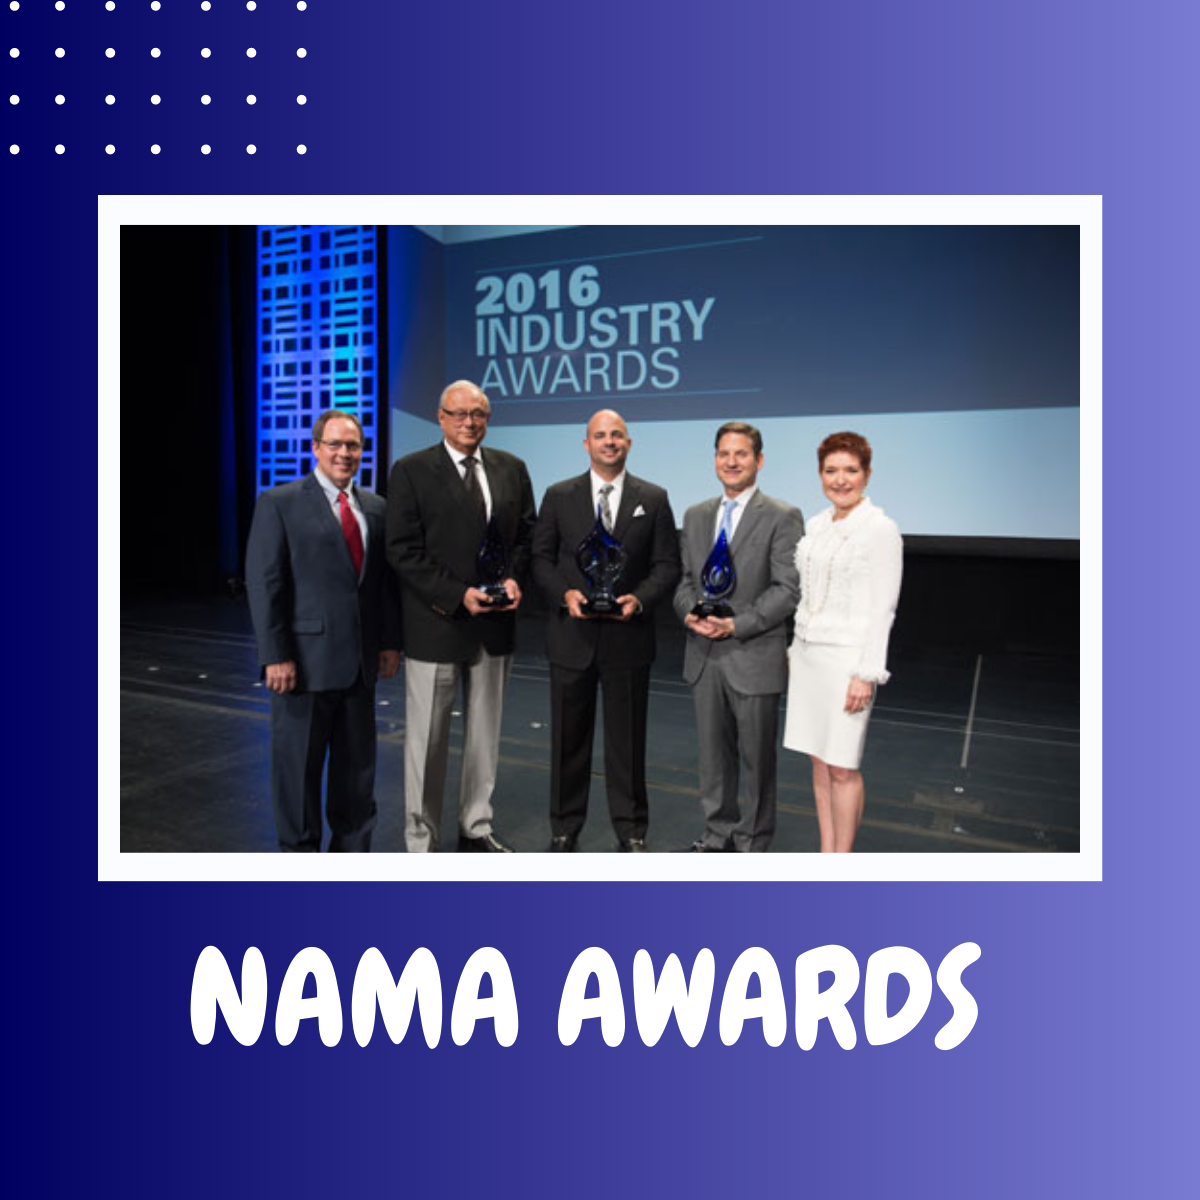 THE NATIONAL AUTOMATIC MERCHANDISING ASSOCIATION (NAMA) AWARDS ART WITTERN ALLIED MEMBER OF THE YEAR